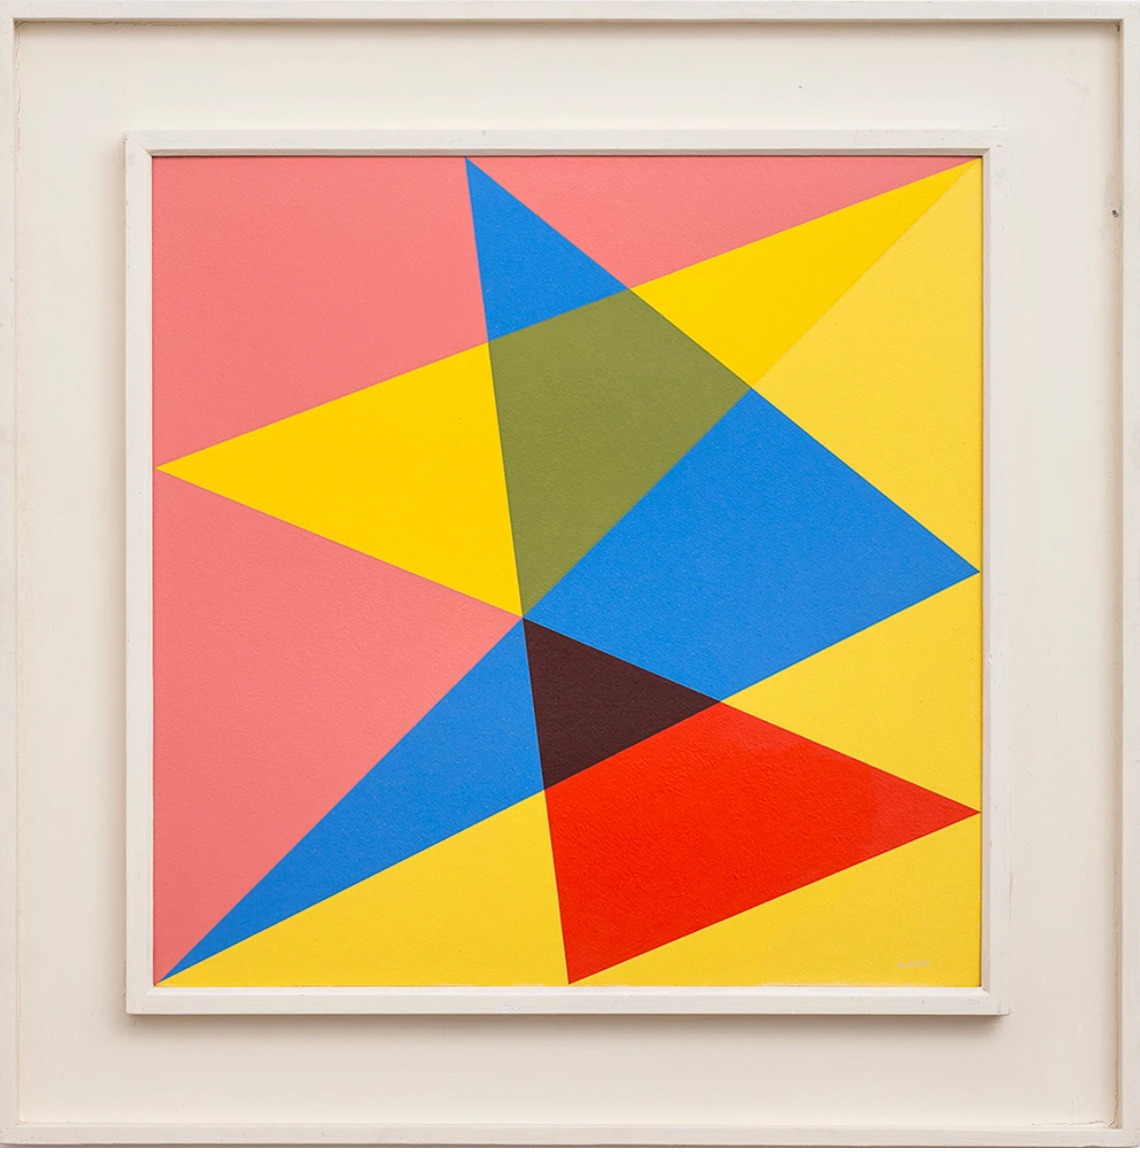 Albert Newall’s oil painting ‘Harmonic Development within a Square’ shows a composition made up of various coloured and overlapping triangular shapes.
